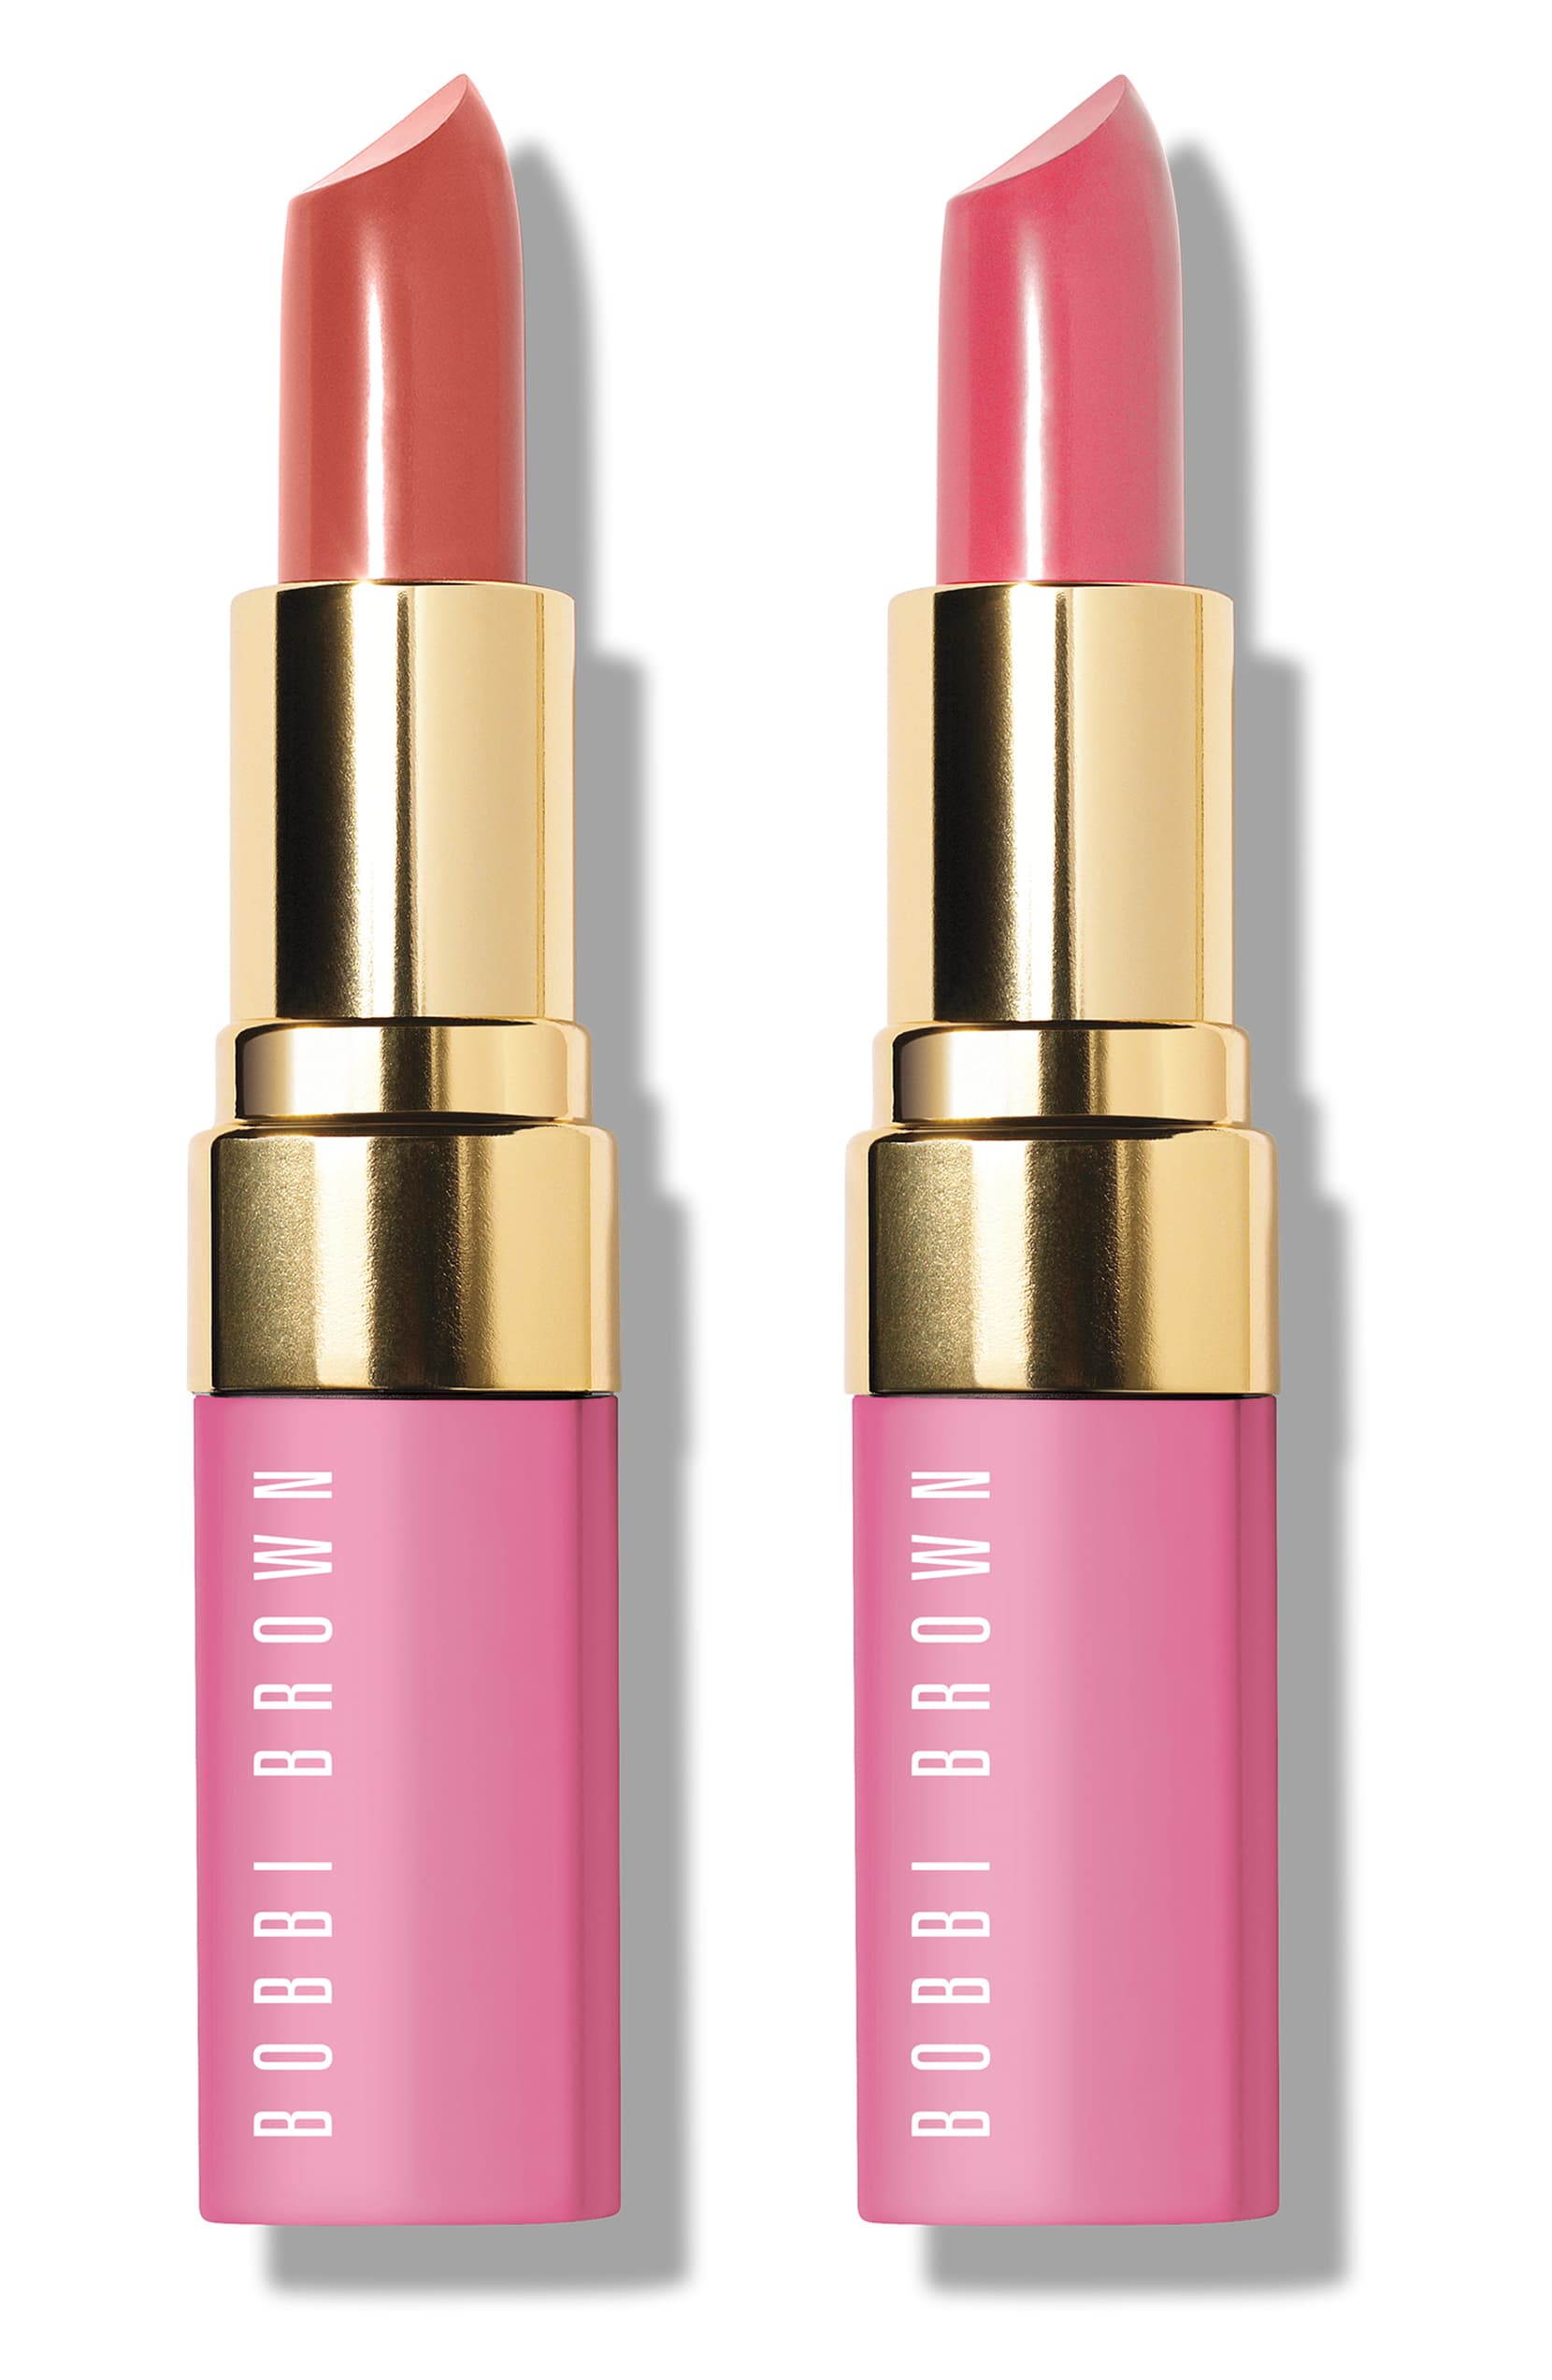 Bobbi Brown Proud To Be Pink Lip Color Duo - eCosmeticWorld